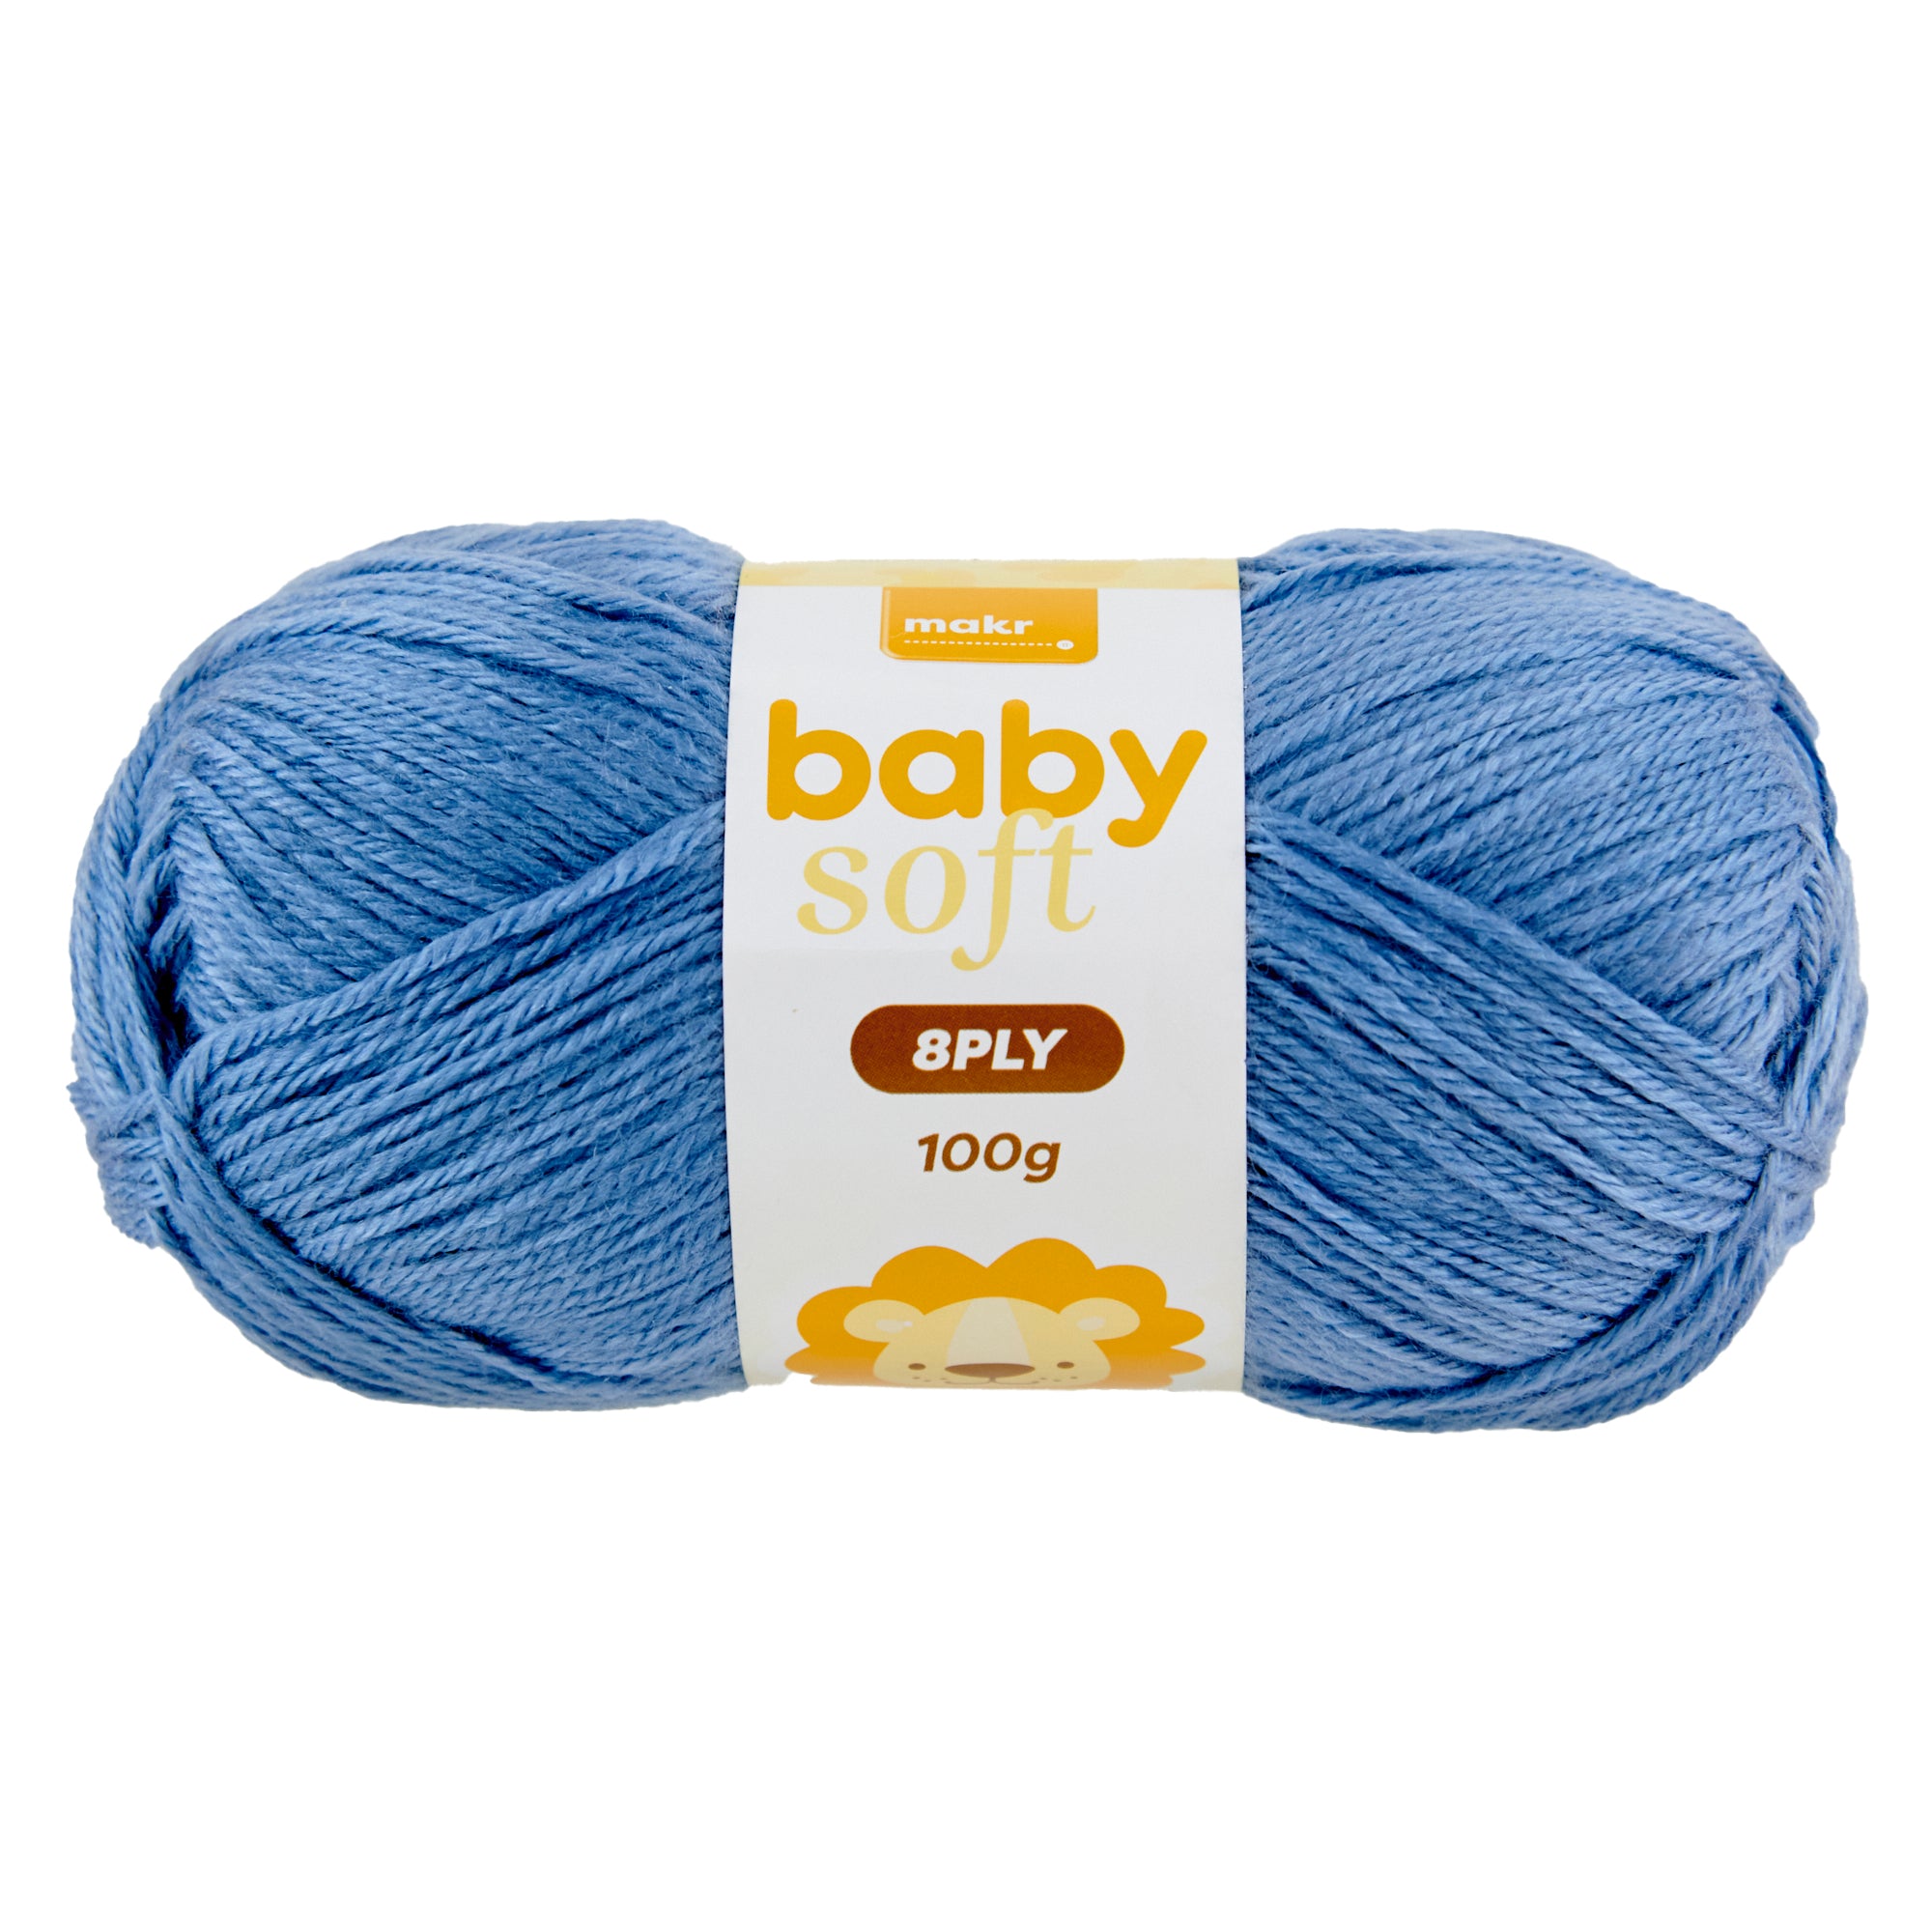 Lincraft - Perfect for bub our Makr Baby Soft Yarn is gentle and